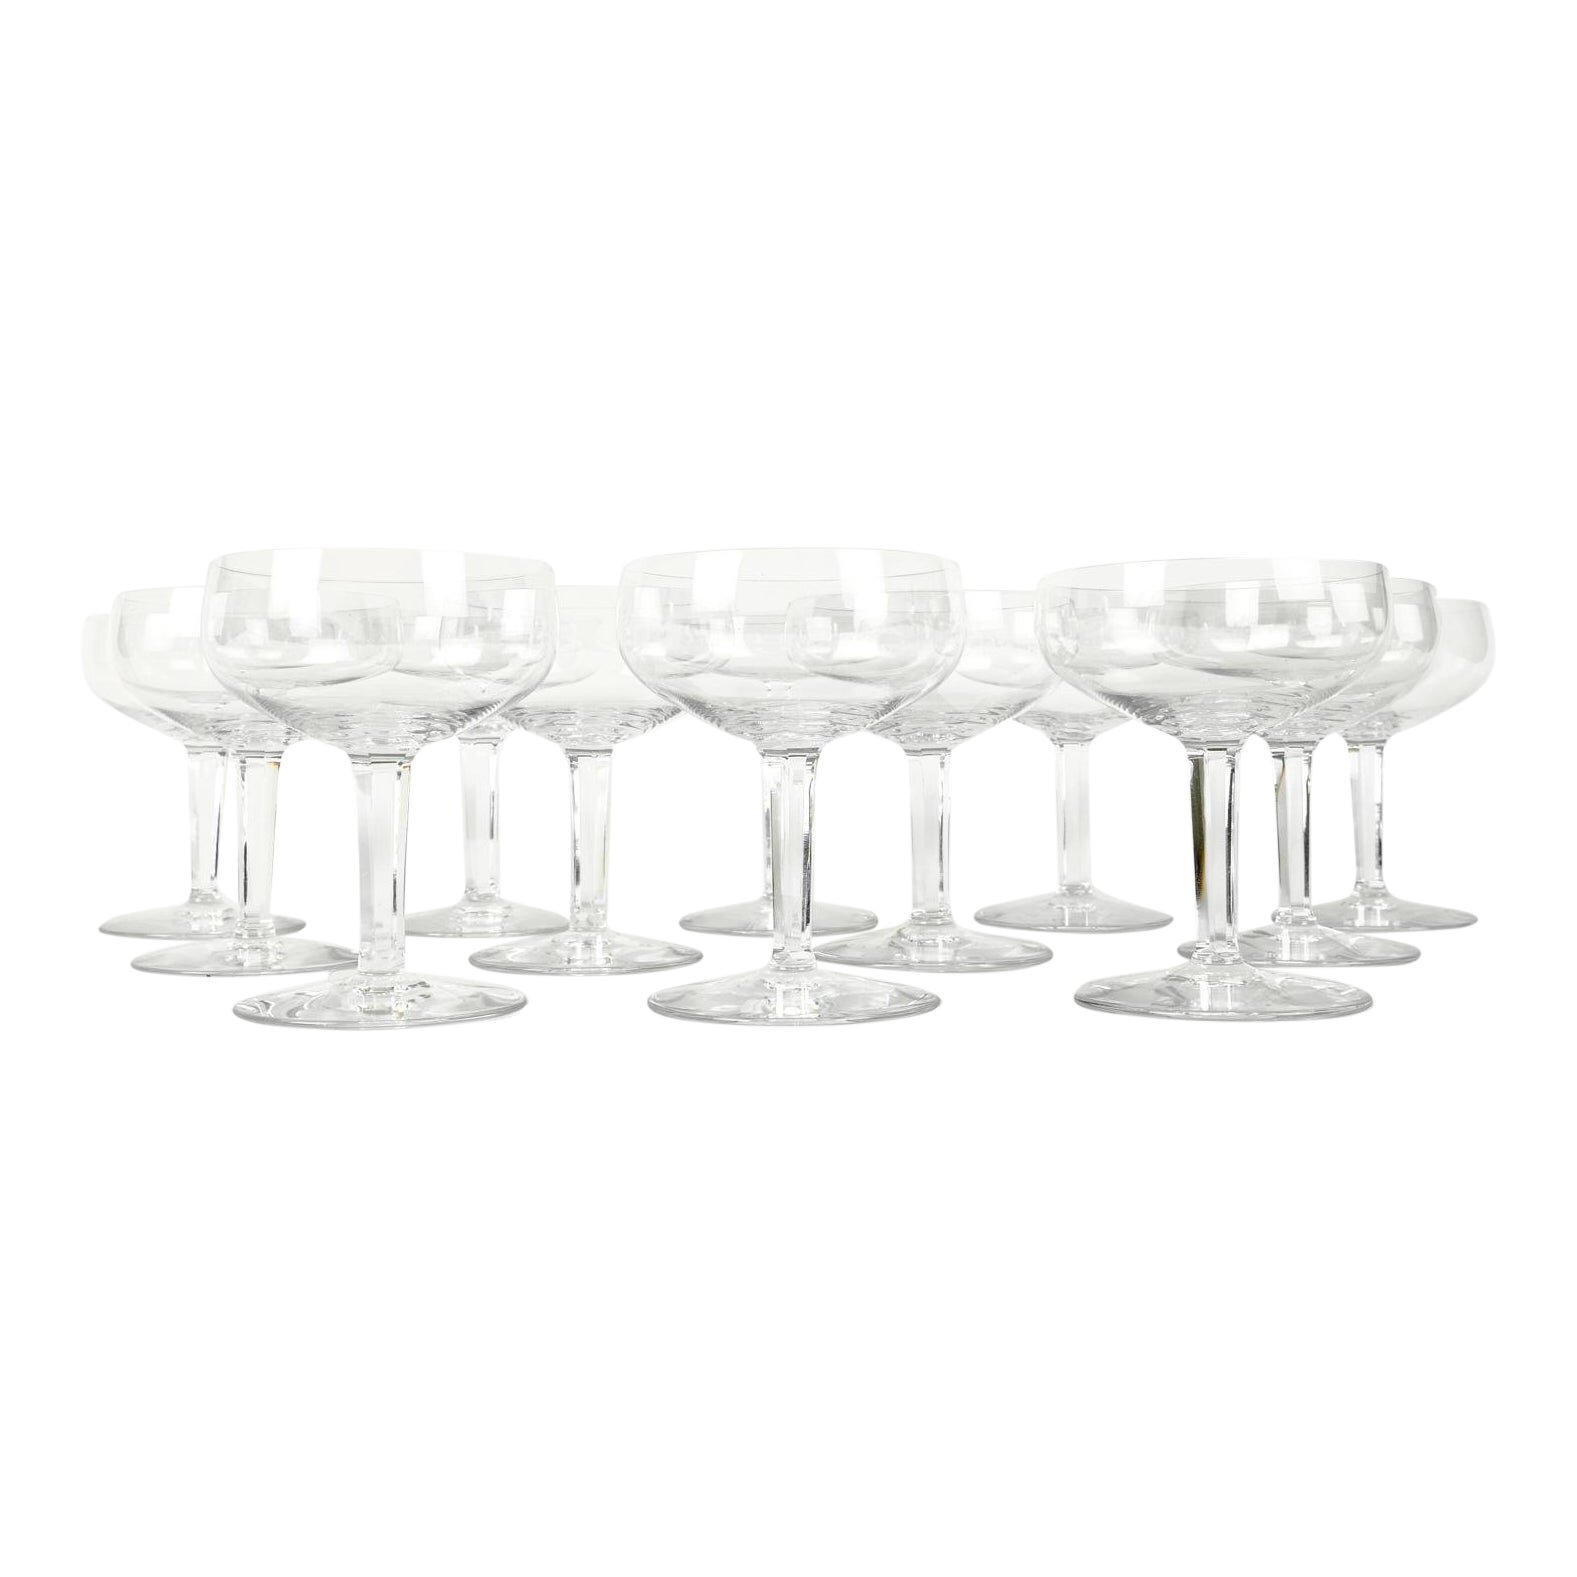 Vintage Baccarat Crystal Coupe Glasses - Set of 12 on Chairish.com